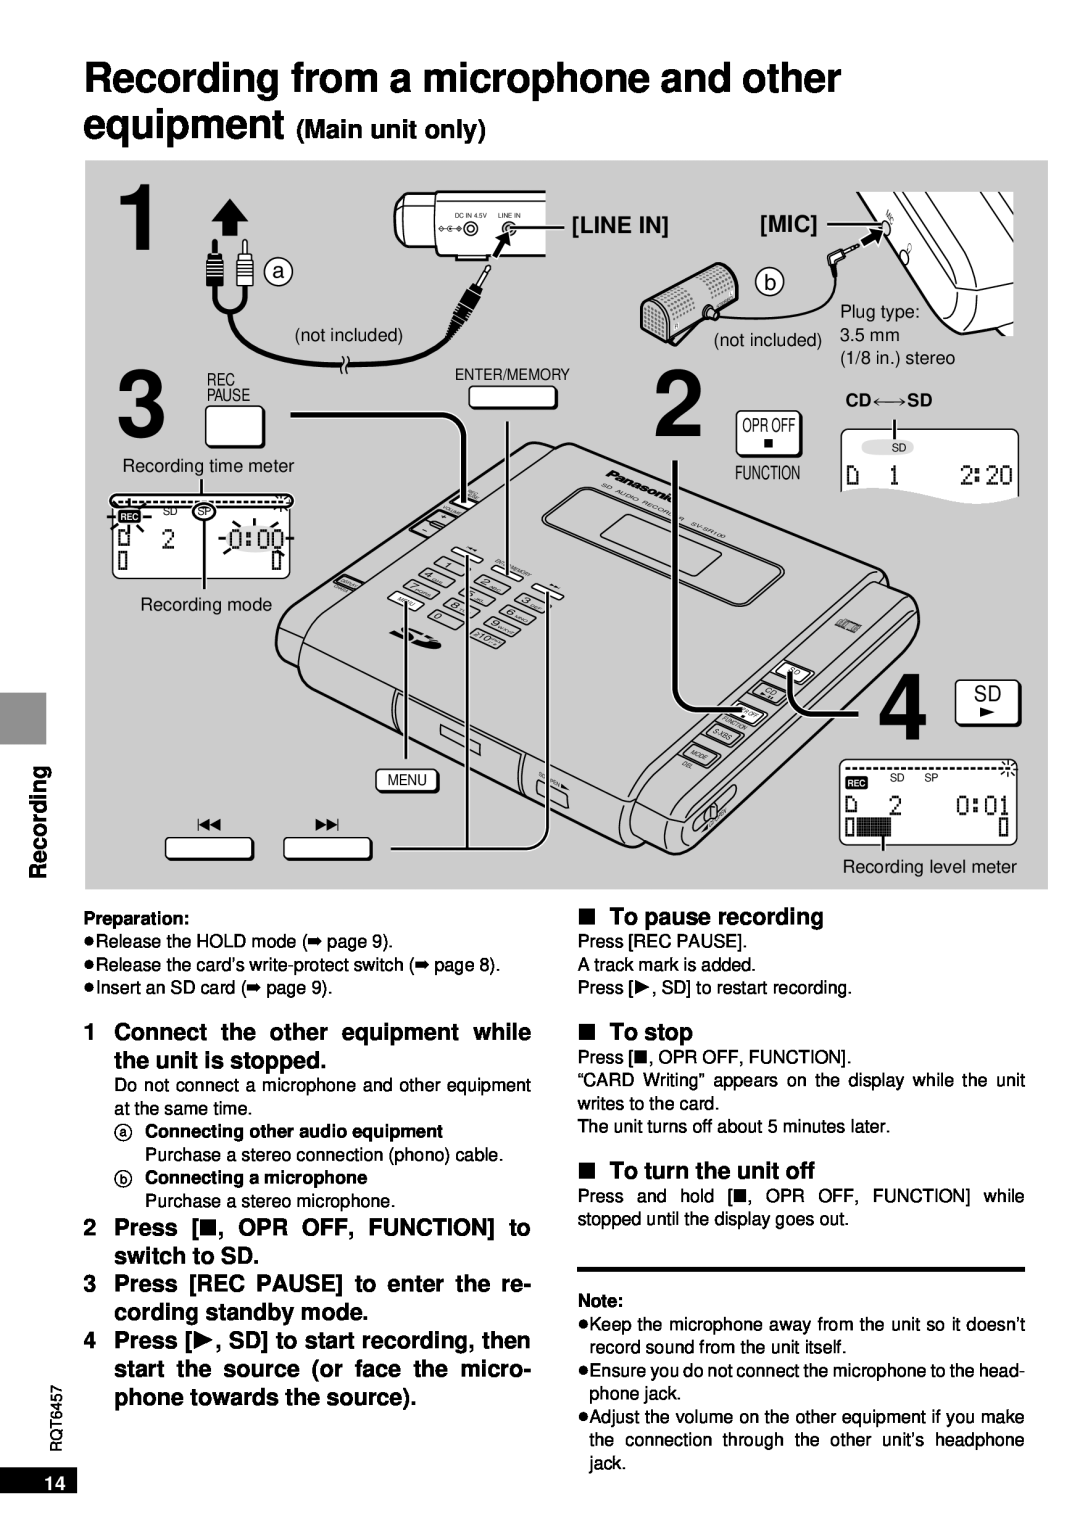 Panasonic SV-SR100 operating instructions Recording from a microphone and other equipment 